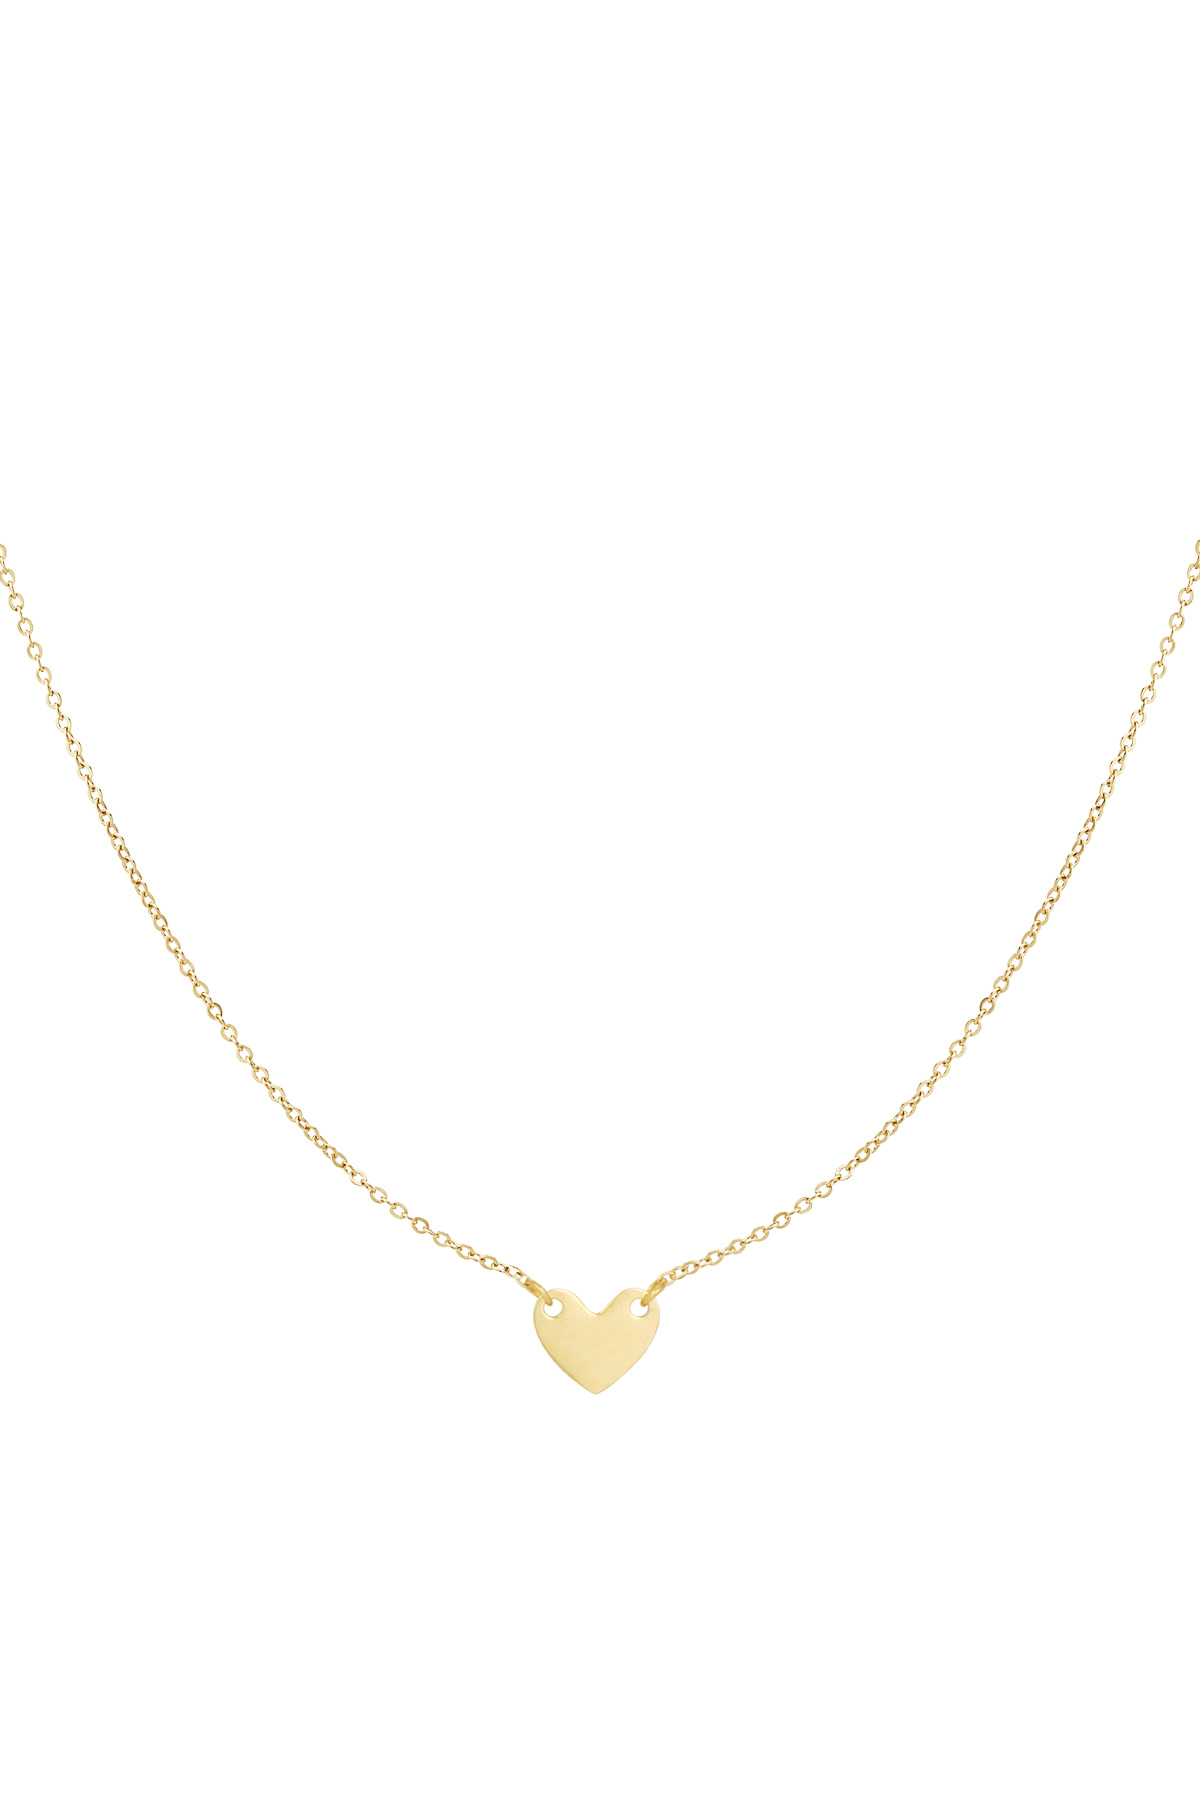 Necklace enduring affection - gold Picture2